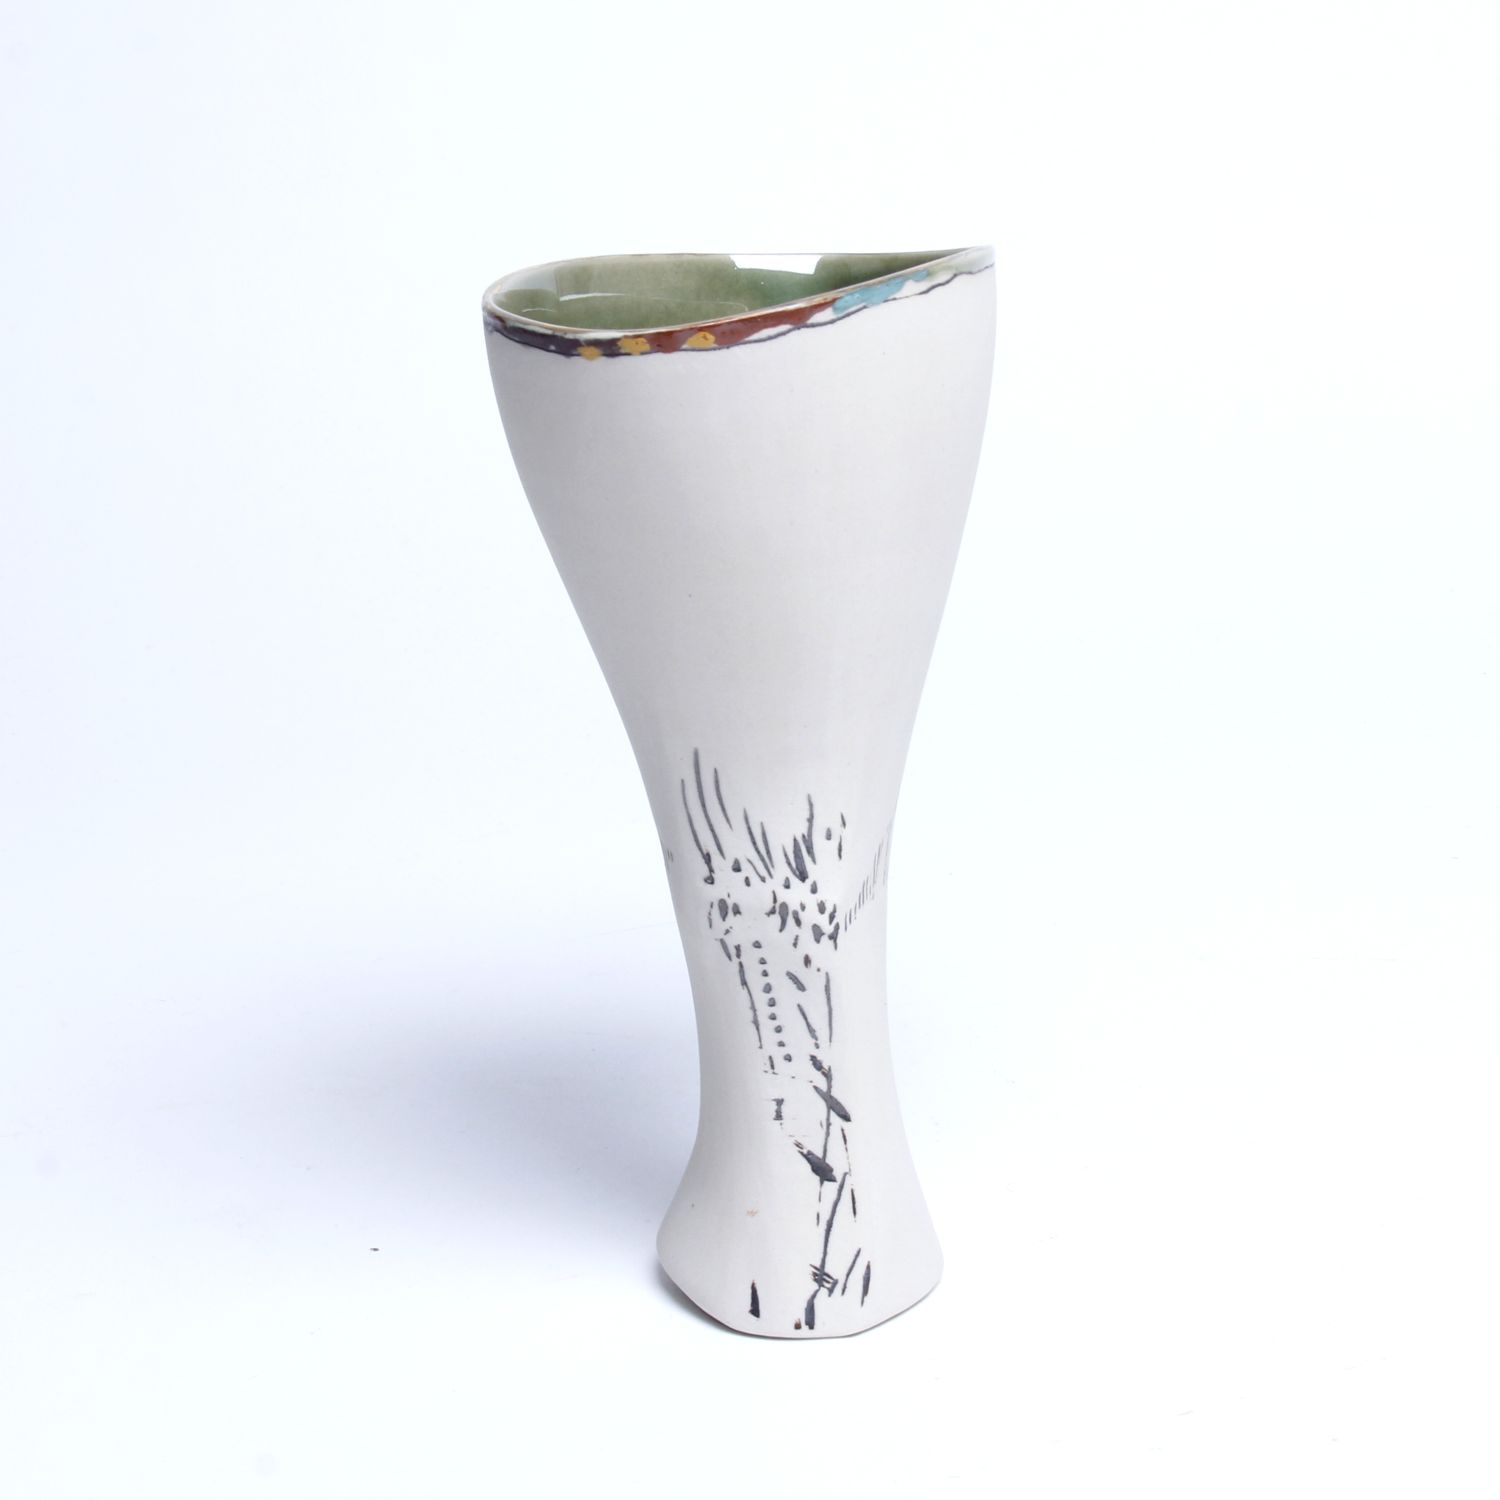 Jane Wilson: Vase (Each sold separately) Product Image 4 of 9